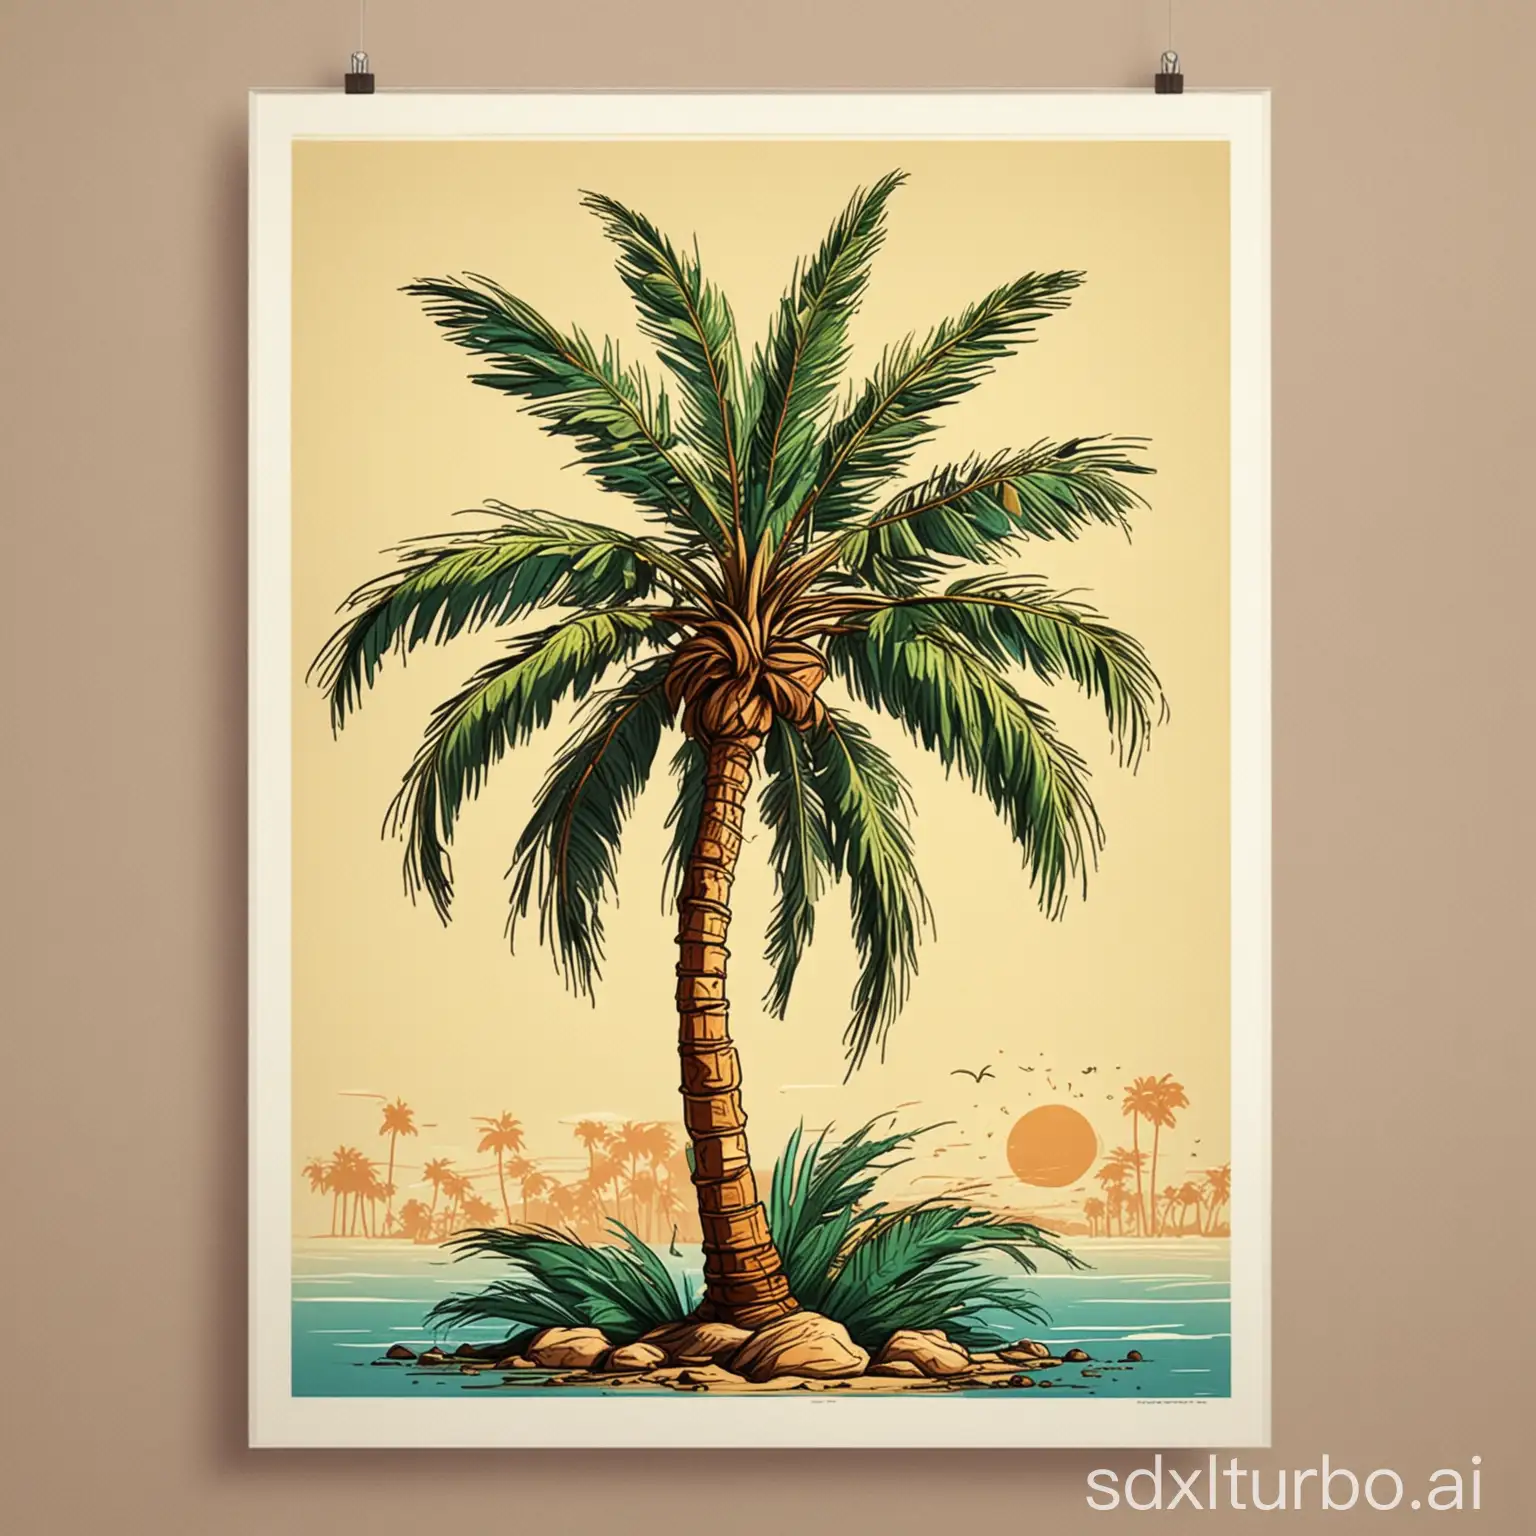 cartoon style palmtree, poster, colored drawing